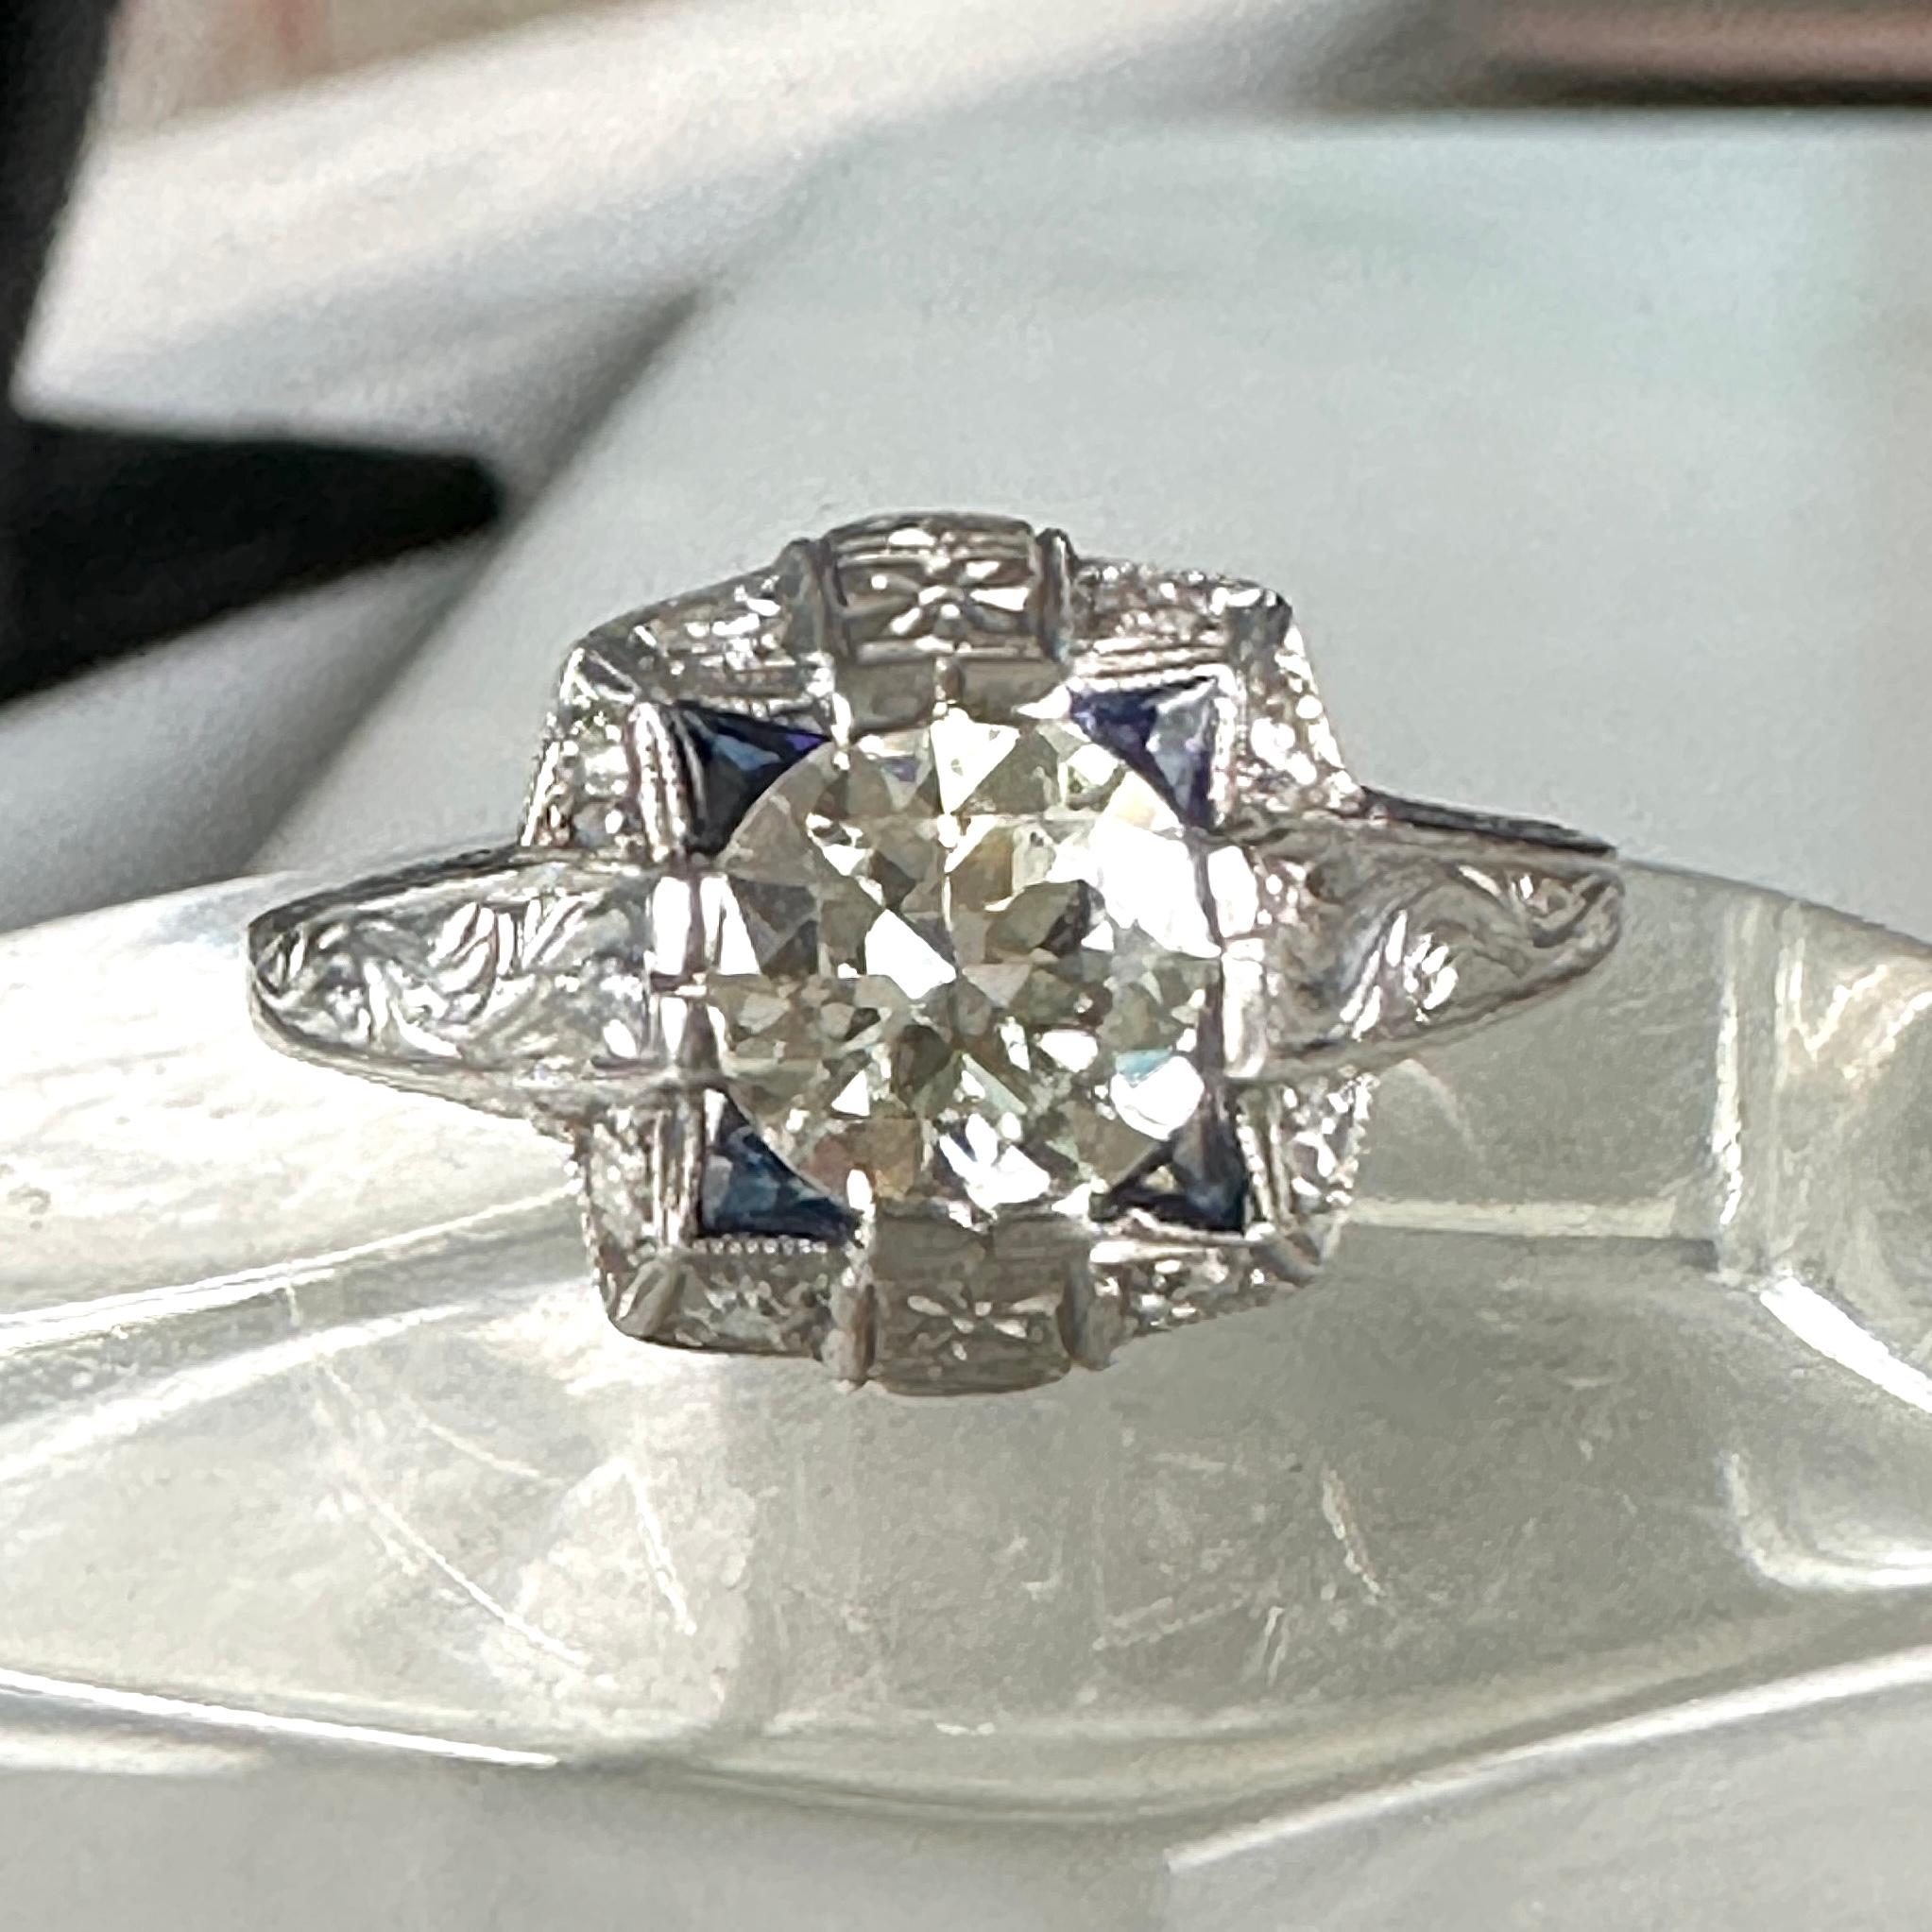 Details:
Stunning Antique Art Deco  diamond & synthetic sapphire engagement ring. The band is platinum. This is a gorgeous ring with lovely engraving around the shoulders of the band, and has engraving details surrounding the diamond. This ring is